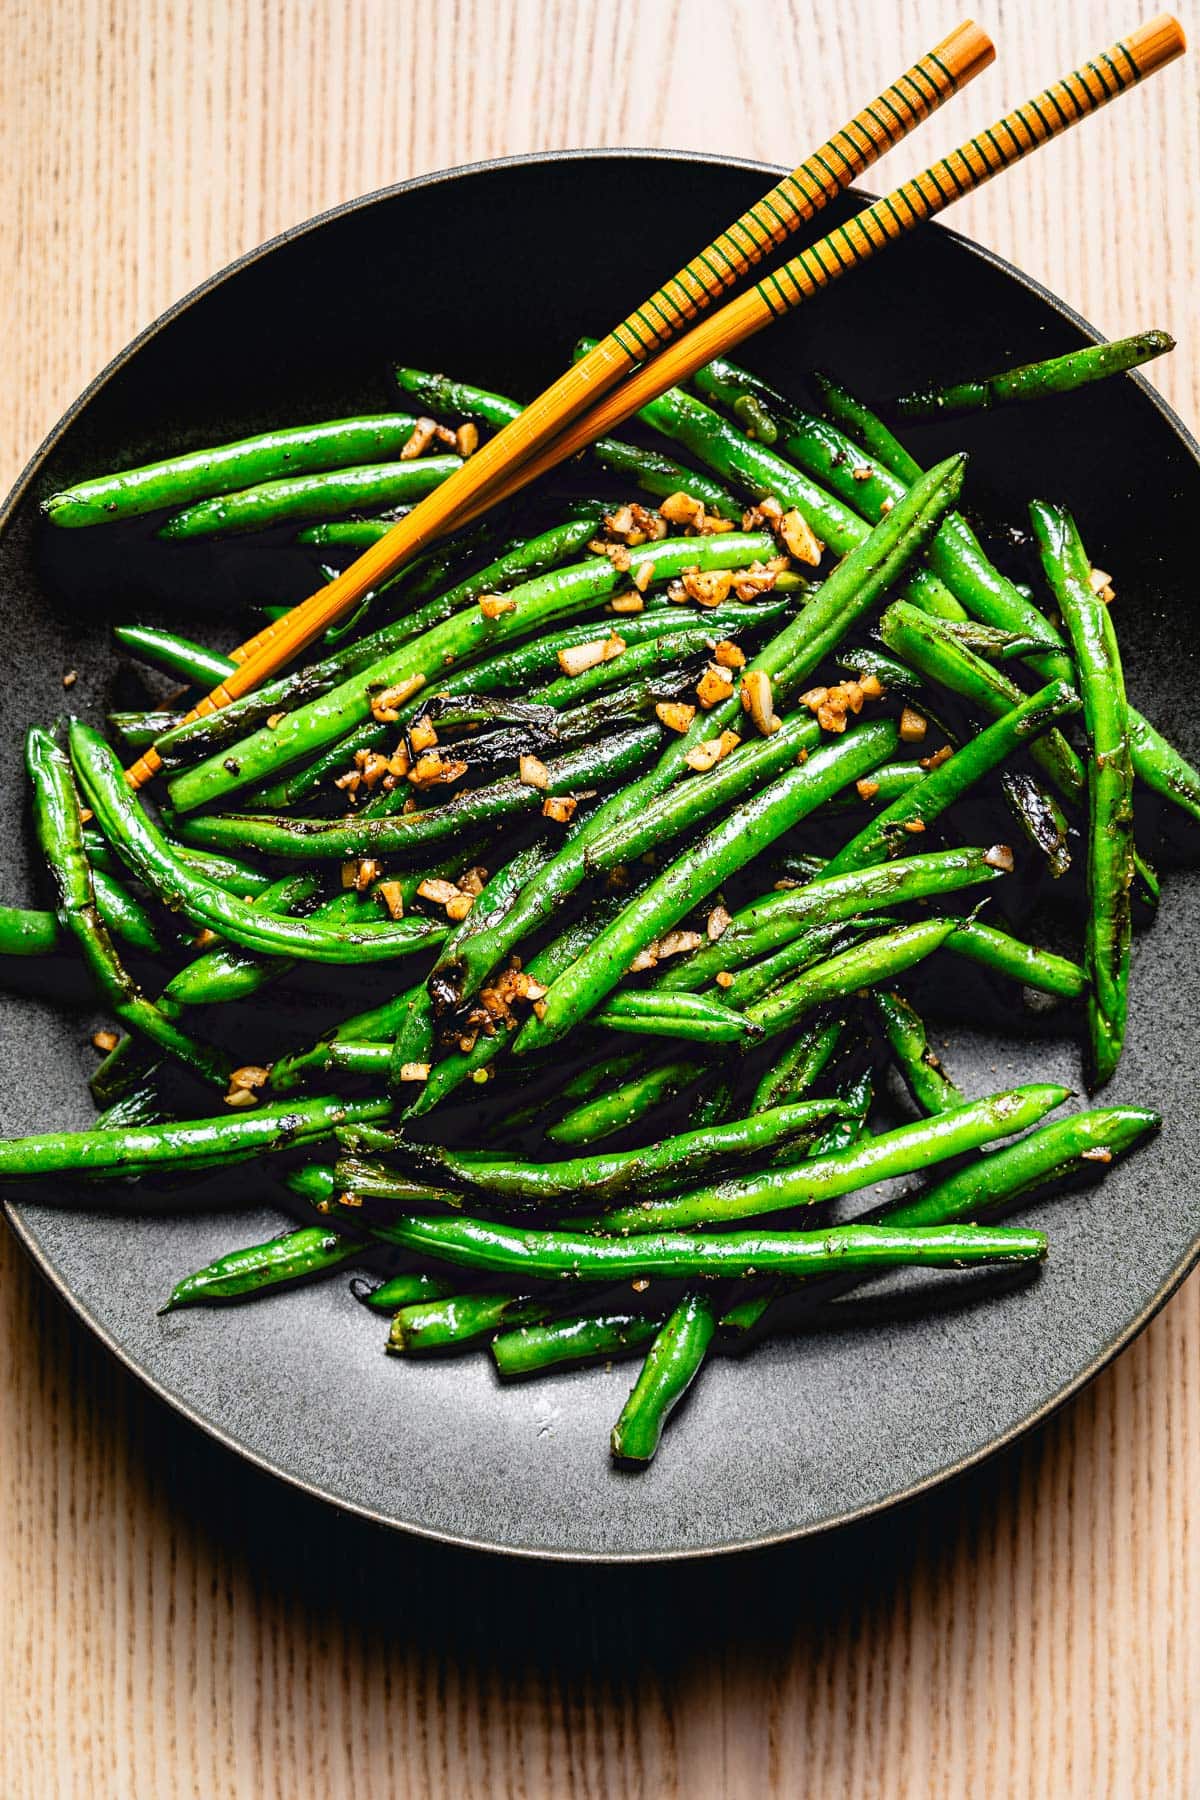 sauteed green beans with garlic on plate overhead